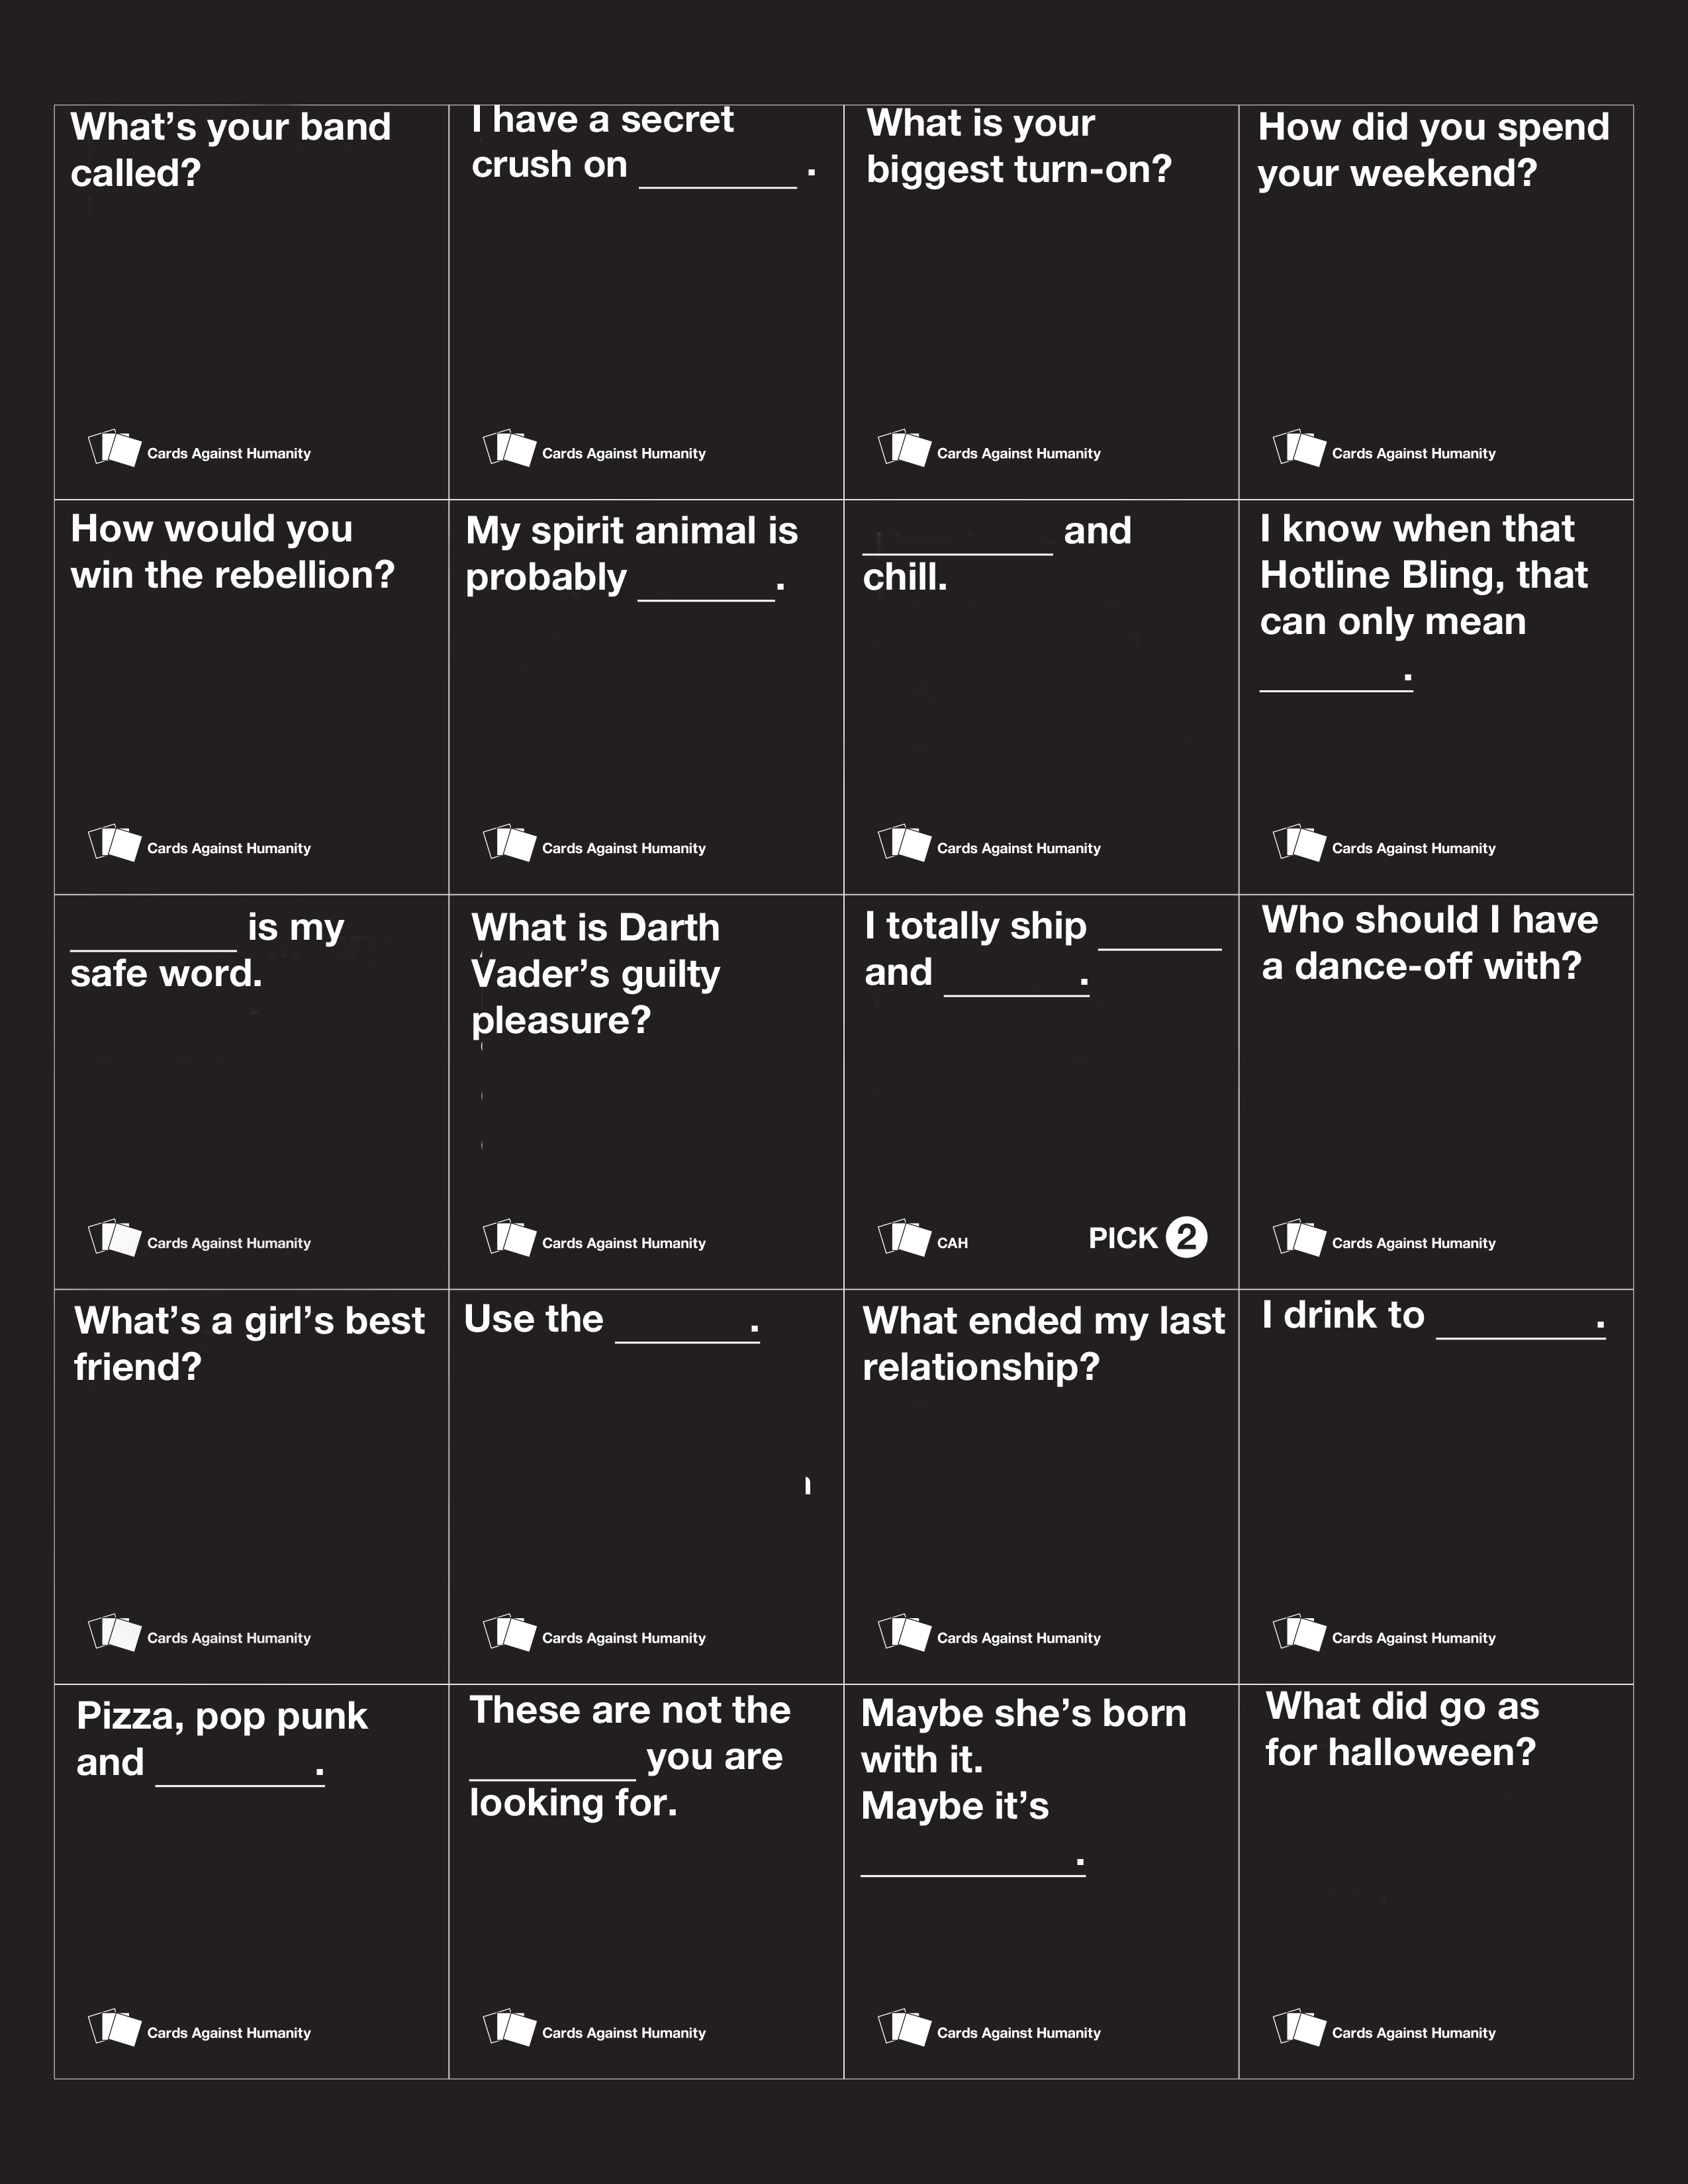 Cards Against Star Wars